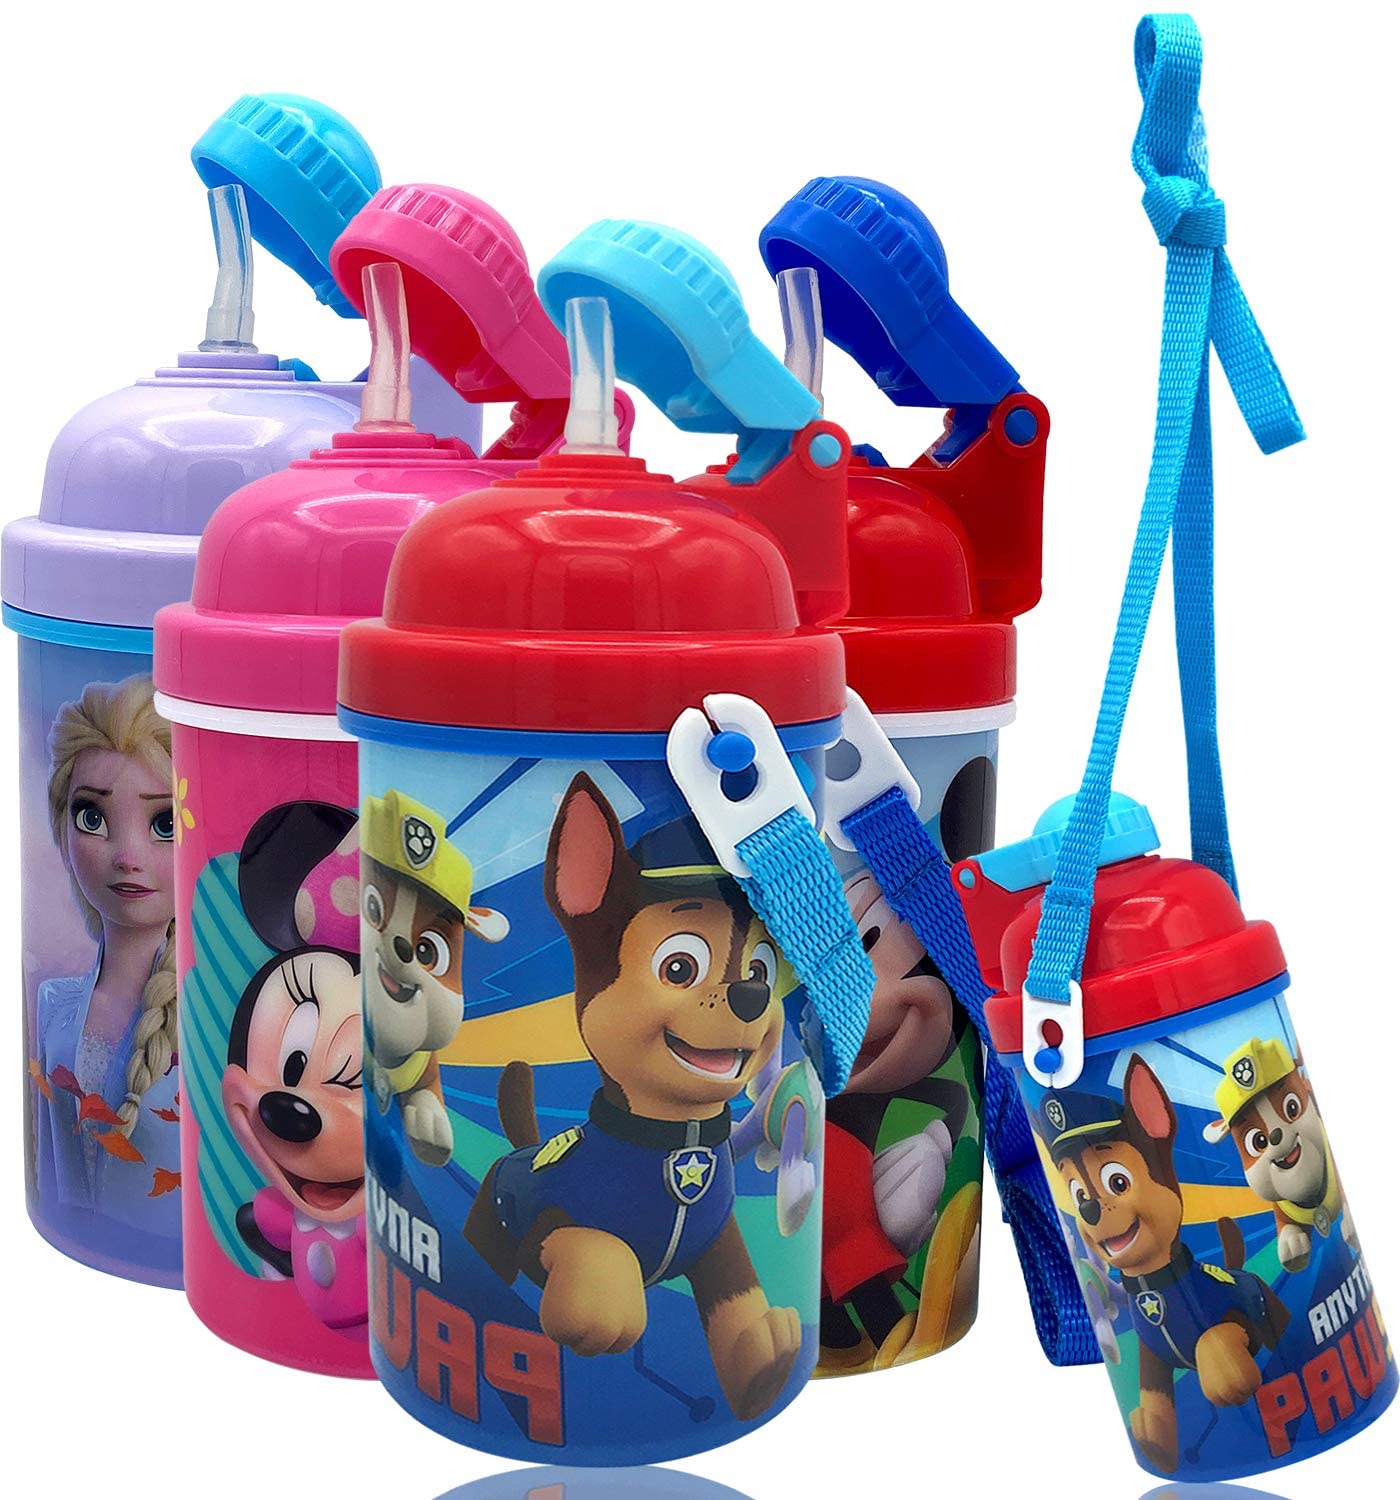 Upd Paw Patrol 12 oz Canteen with Popup Lid and Strap